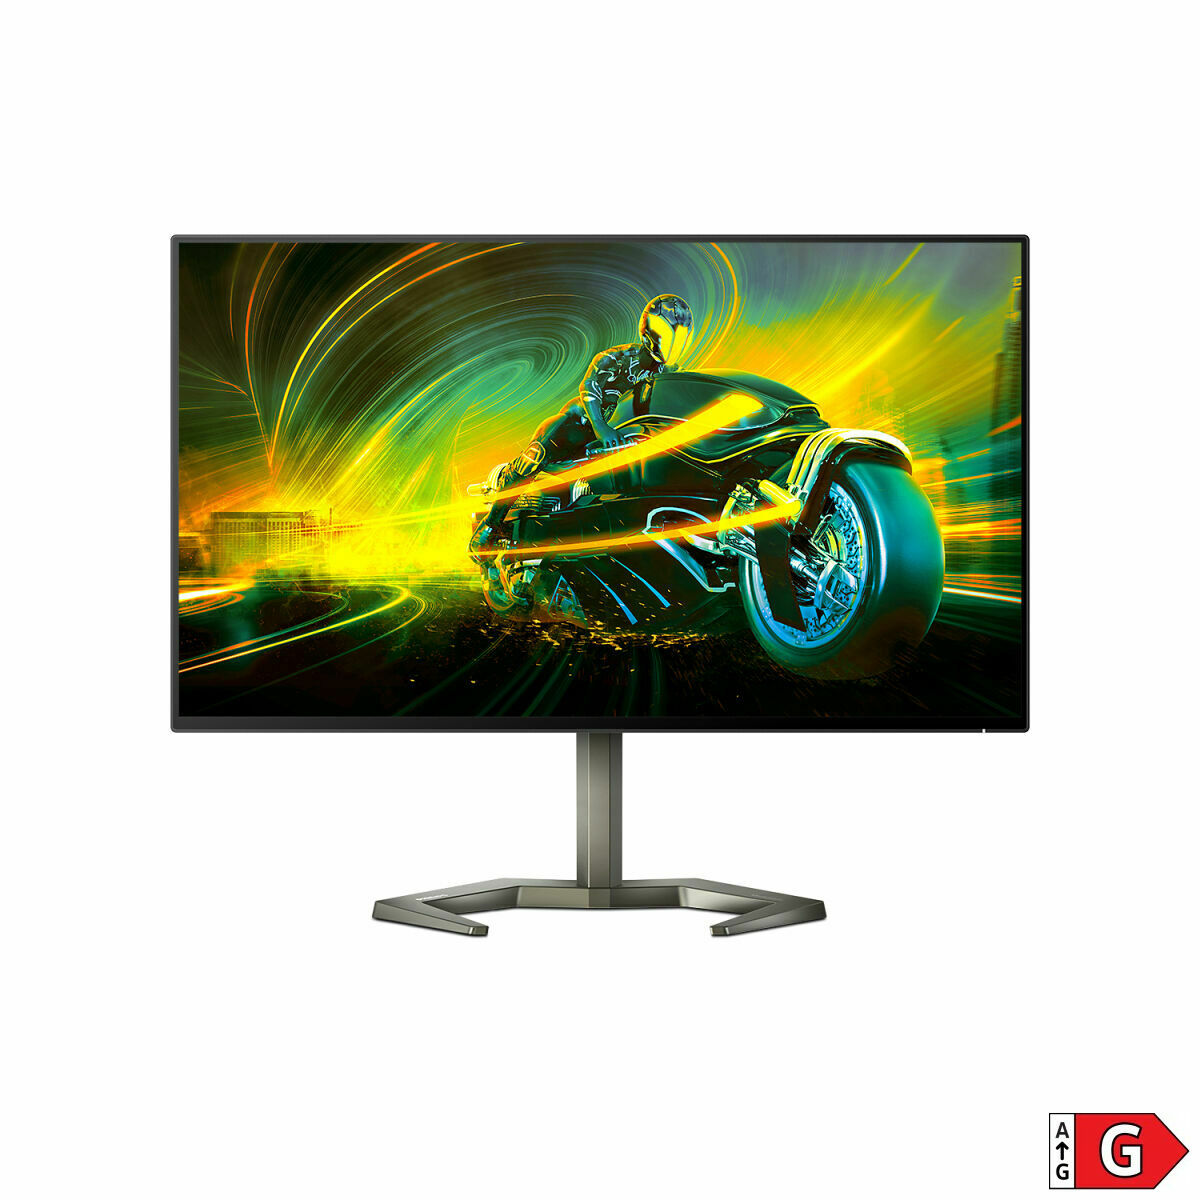 Monitor Philips 27M1F5800/00 3840 x 2160 px 27", Philips, Computing, monitor-philips-27m1f5800-00-3840-x-2160-px-27, :AMD, :AMD Freesync, :Ultra HD, Brand_Philips, category-reference-2609, category-reference-2642, category-reference-2644, category-reference-t-19685, computers / peripherals, Condition_NEW, office, Price_700 - 800, Teleworking, RiotNook